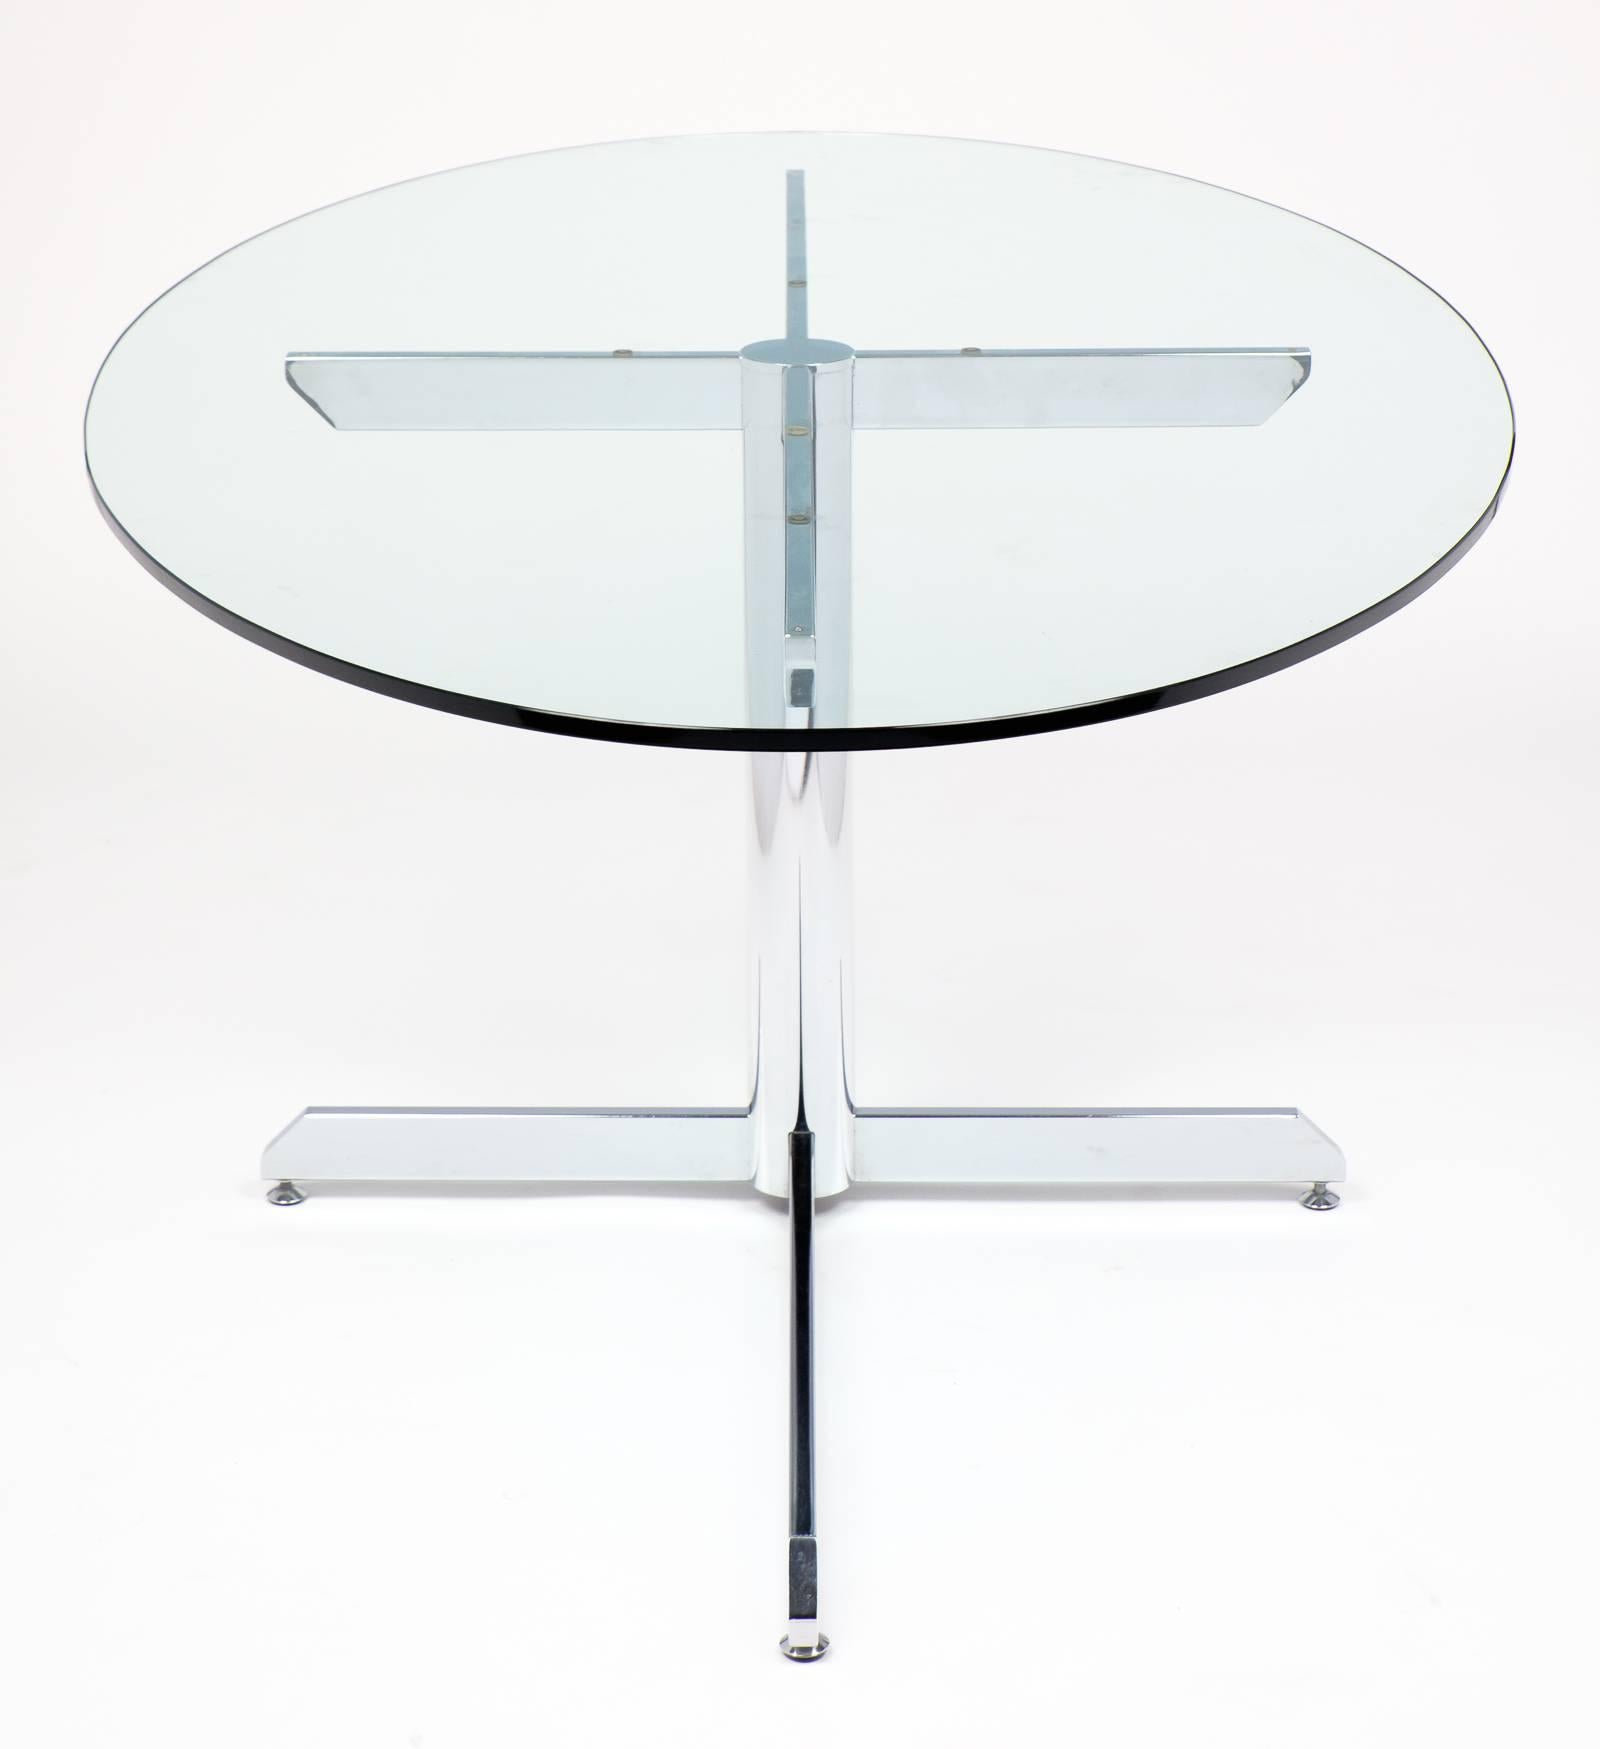 20th Century French Modernist Oval Glass and Chrome Knoll Style Dining Table